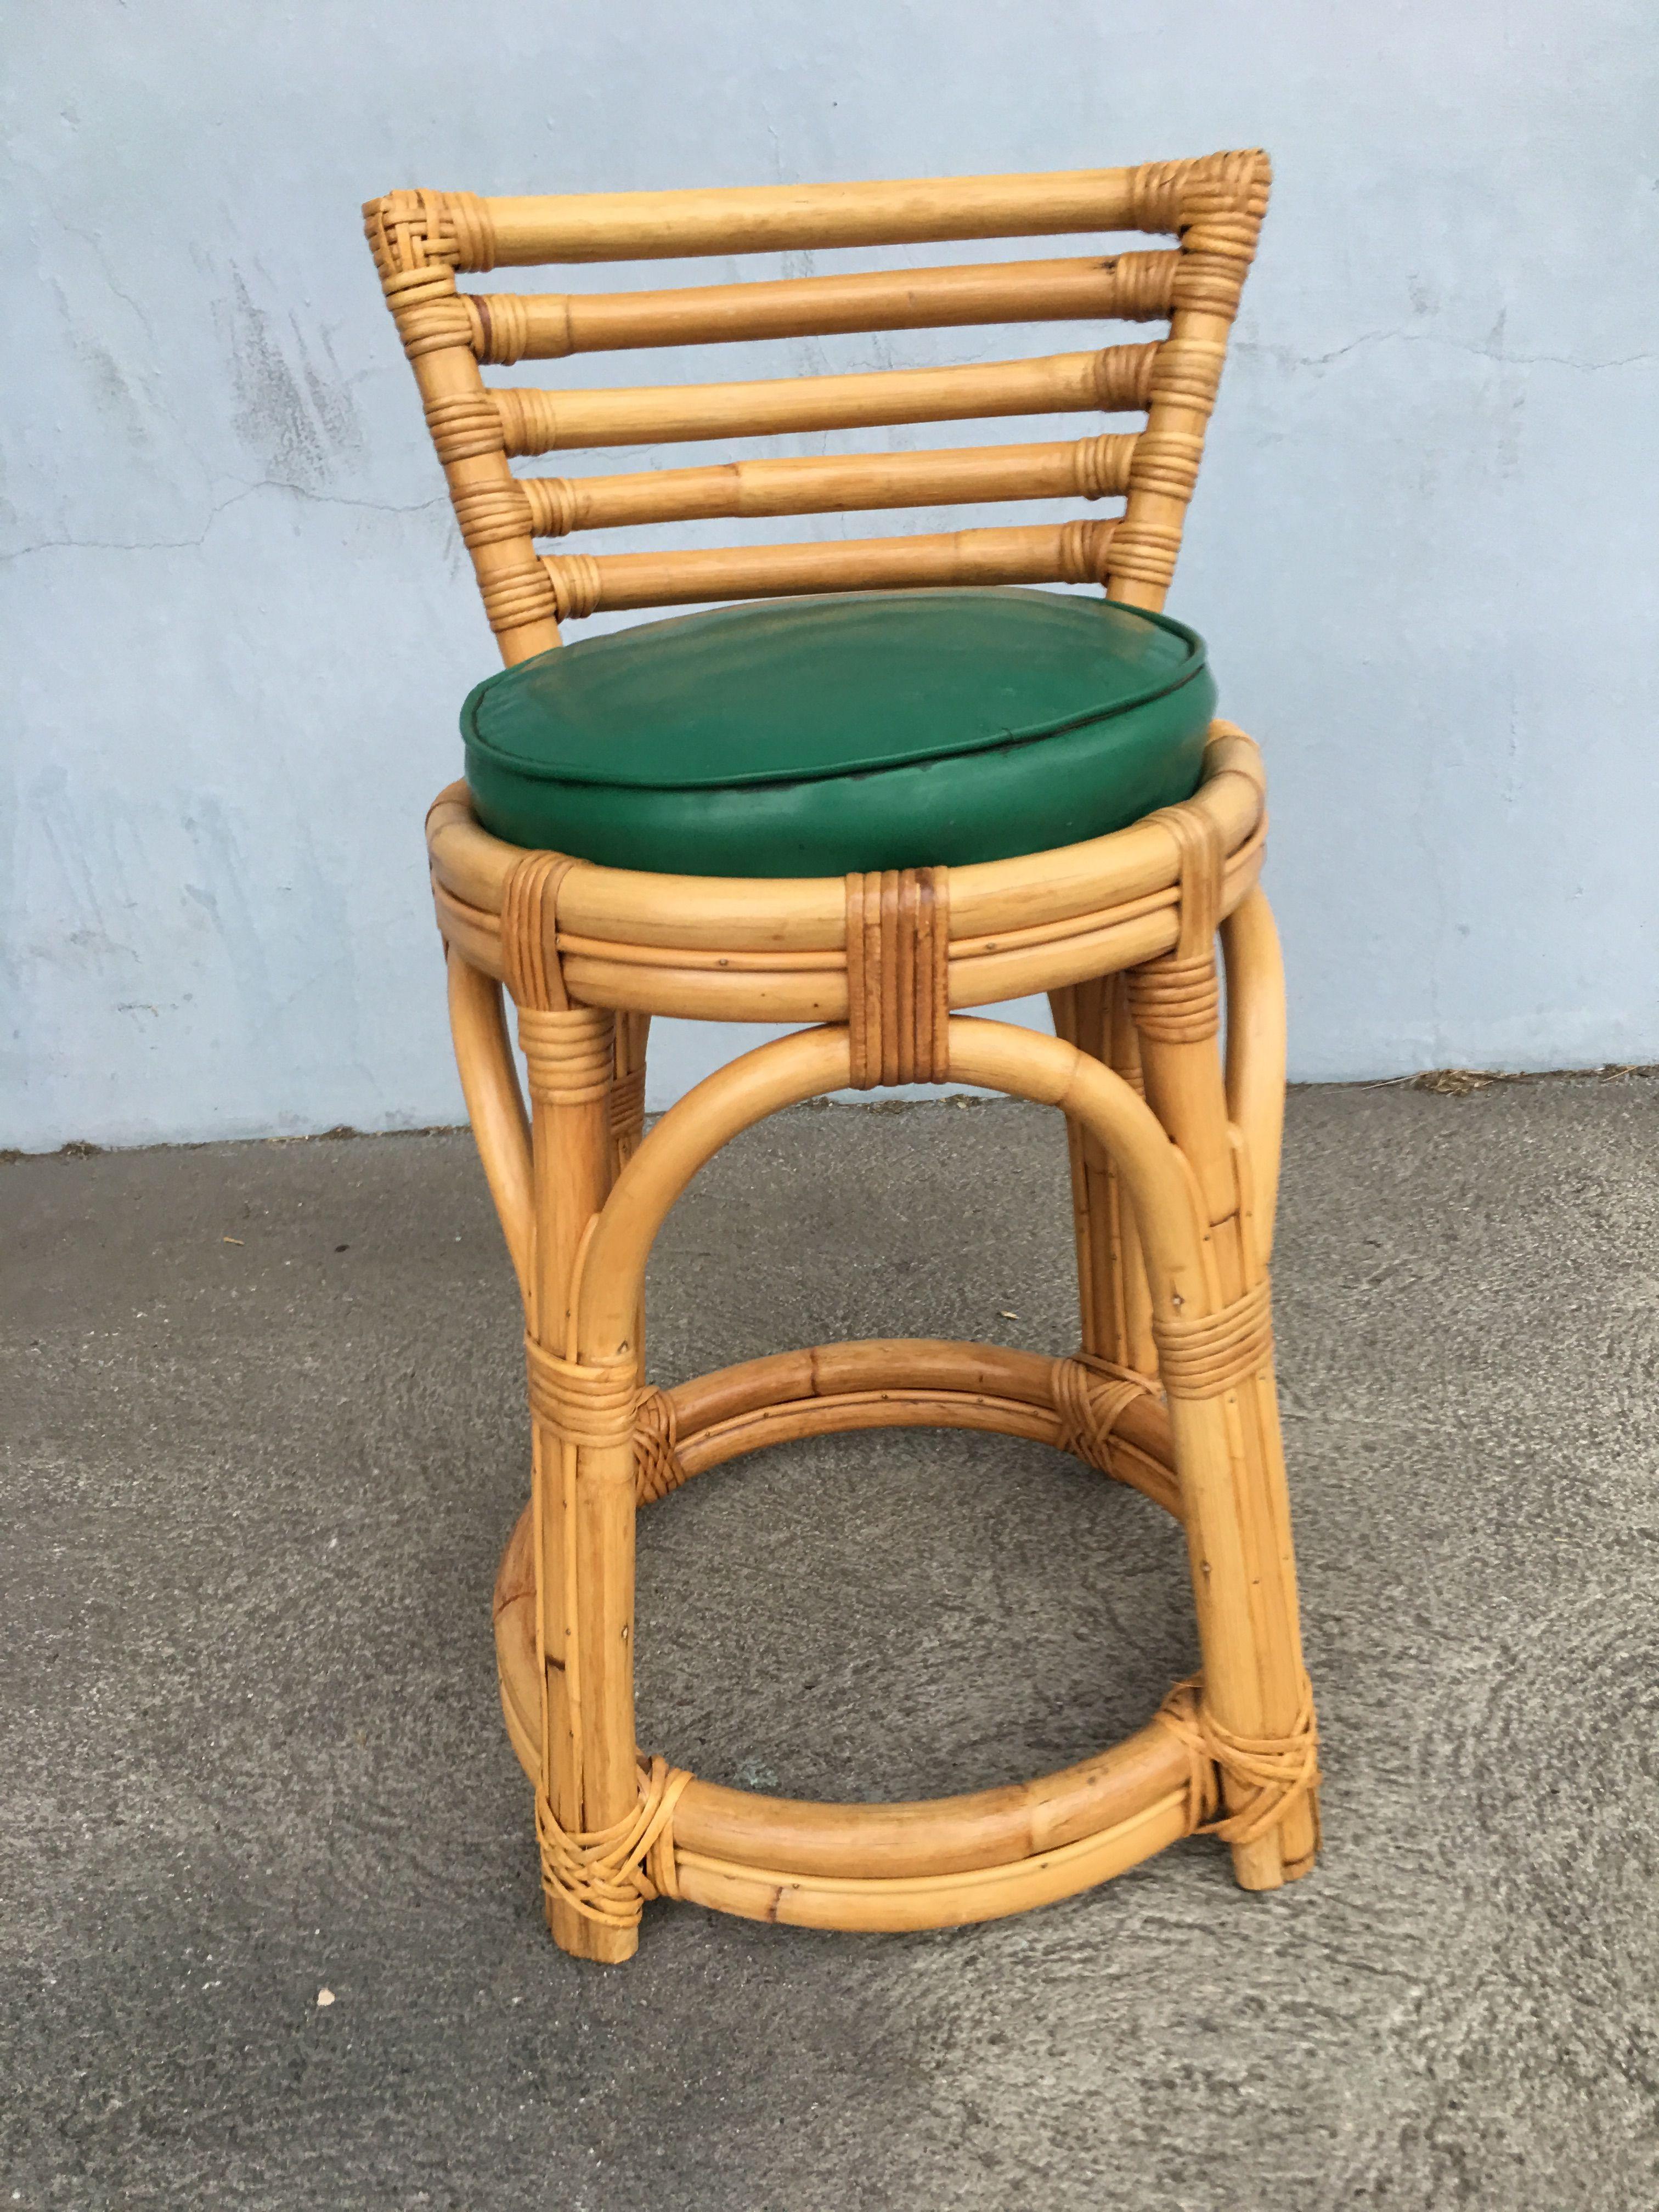 Restored three-stand rattan vanity stool with green vinyl seat and five-strand seat back. Restored to new for you. All rattan, bamboo and wicker furniture has been painstakingly refurbished to the highest standards with the best materials. All